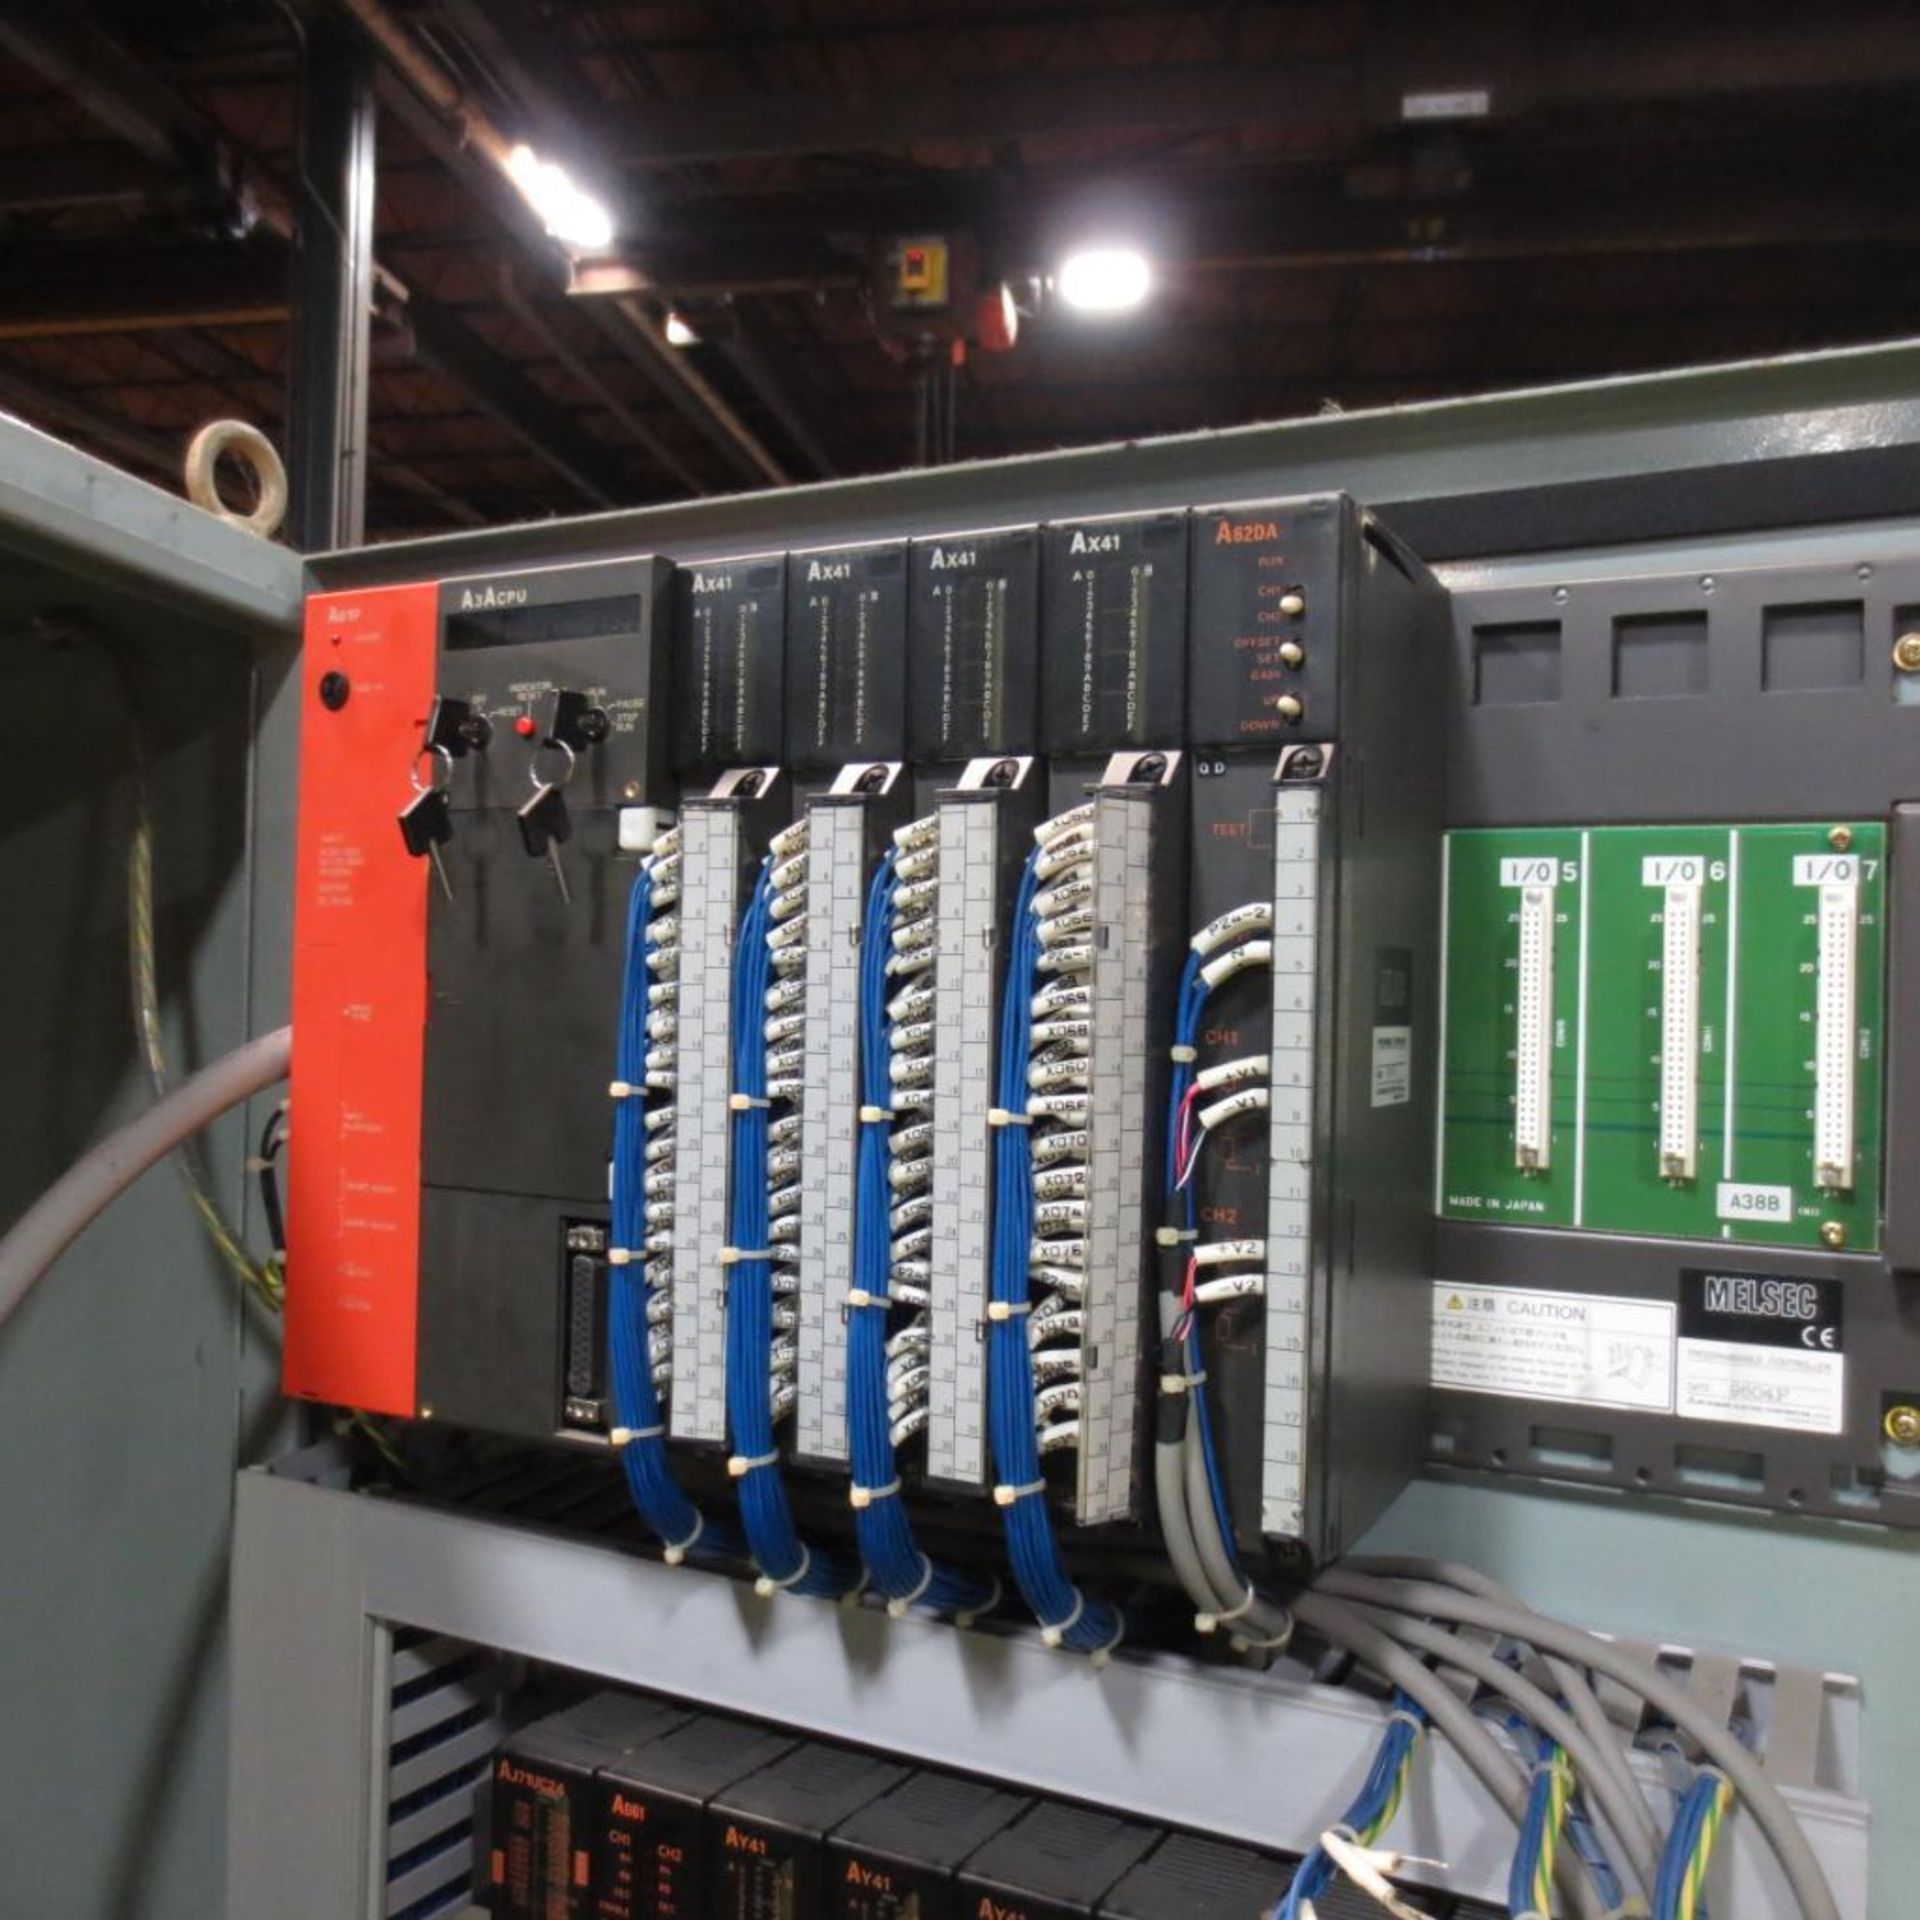 G Module Control Panel. Loading Fee is $25.00 - Image 4 of 6